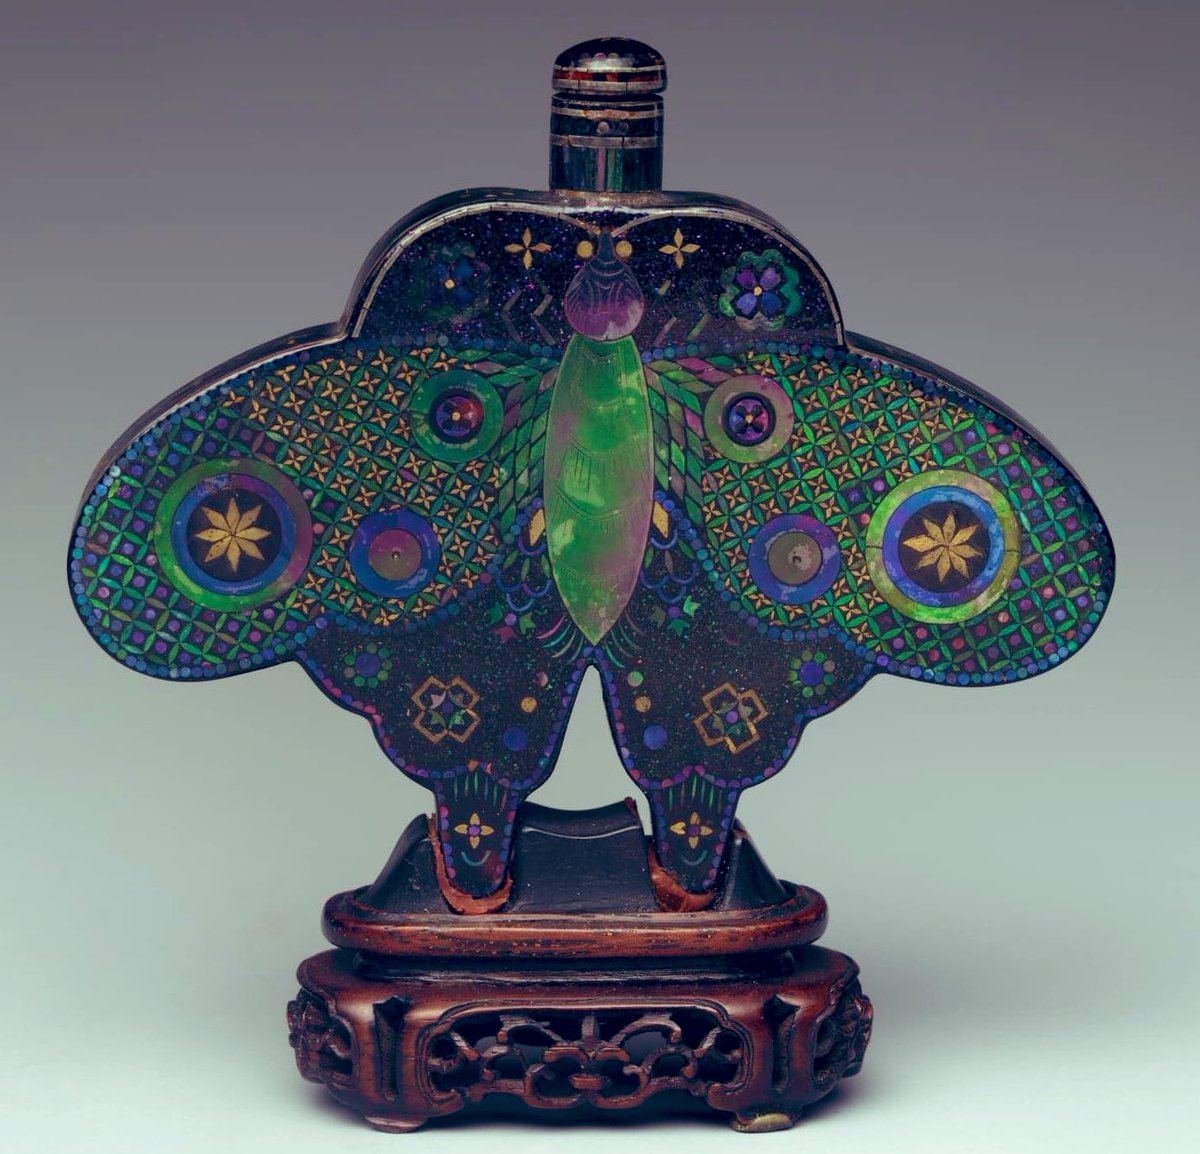 Late Qing Dynasty (1644-1911) butterfly-shaped snuff bottle. Metal covered with lacquer, inlaid with mother-of-pearl and gold. The butterfly is cherished for its beauty and is associated with joy and delight, in Chinese art.